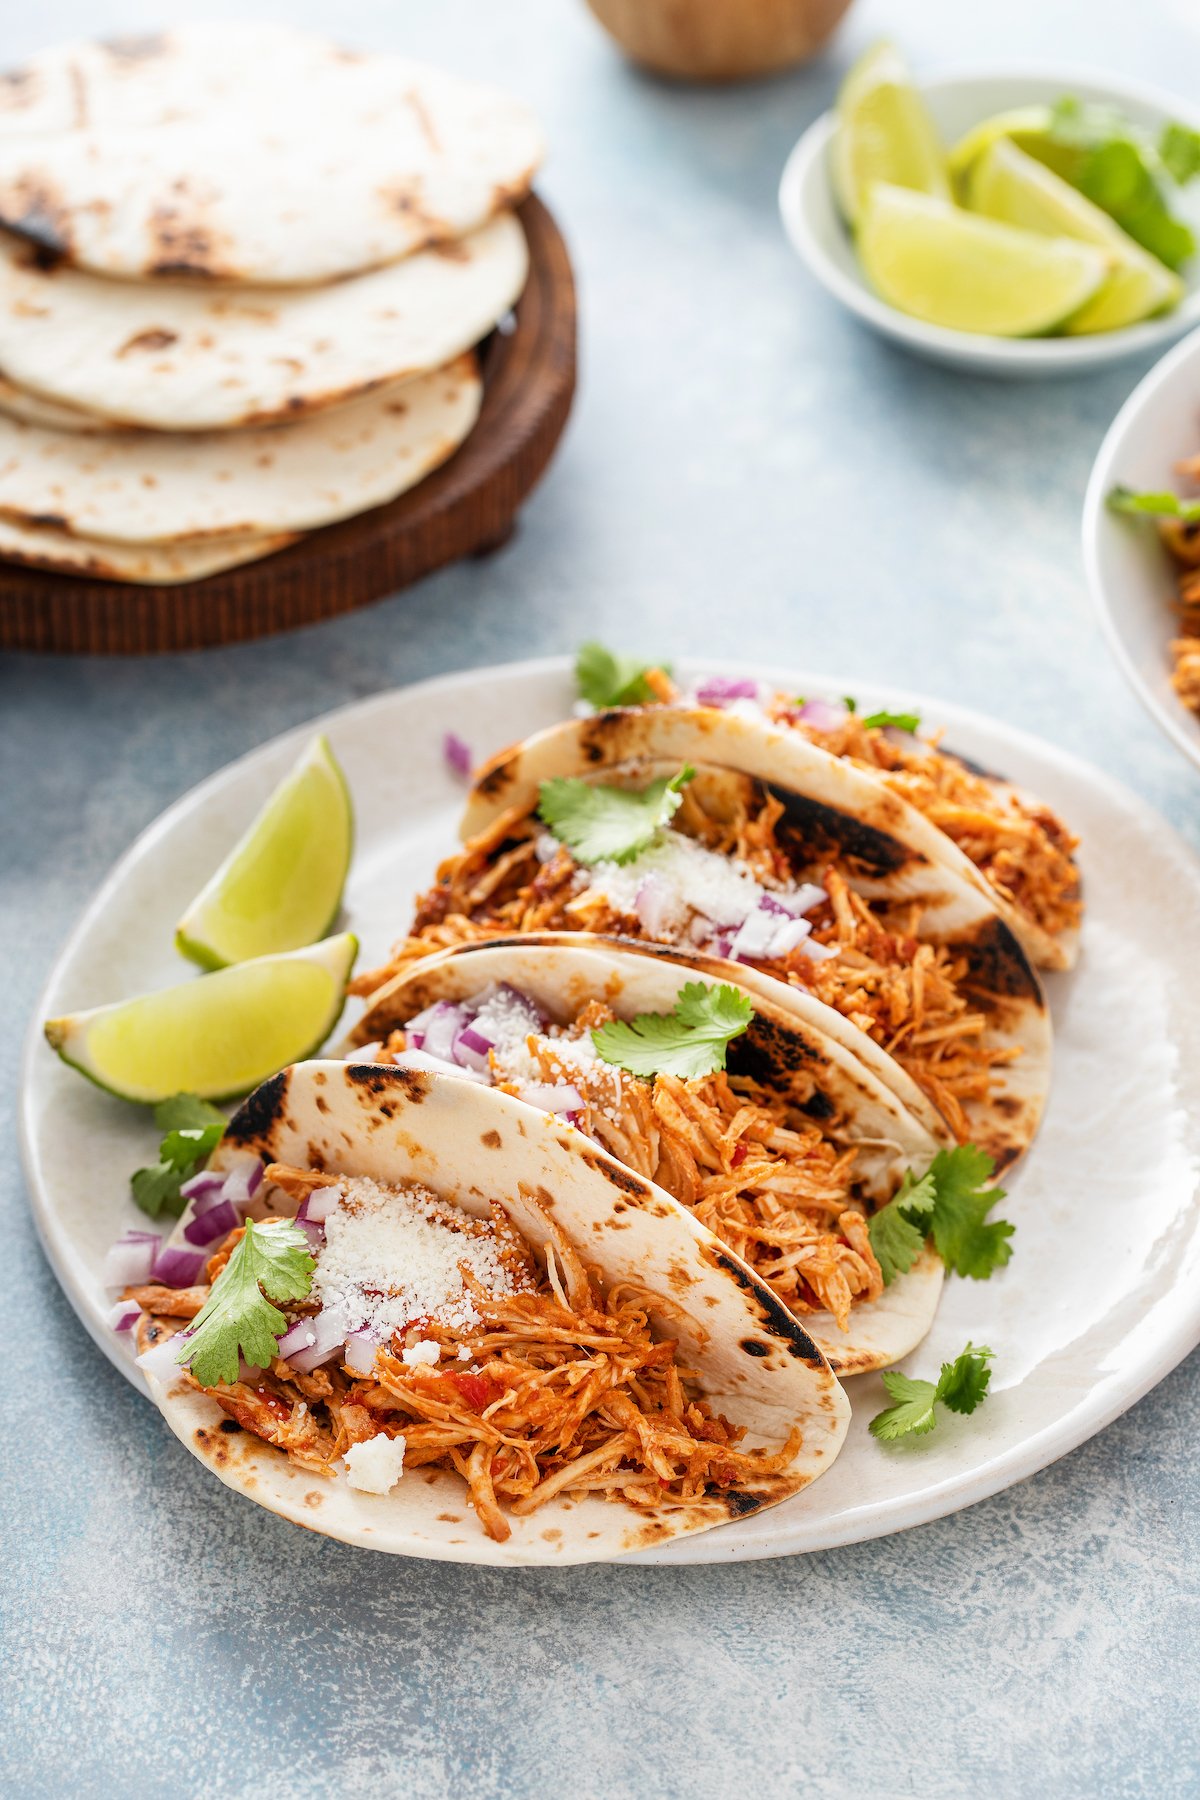 A plate of shredded chicken tacos next to a stack of tortillas and a dish of lime wedges.